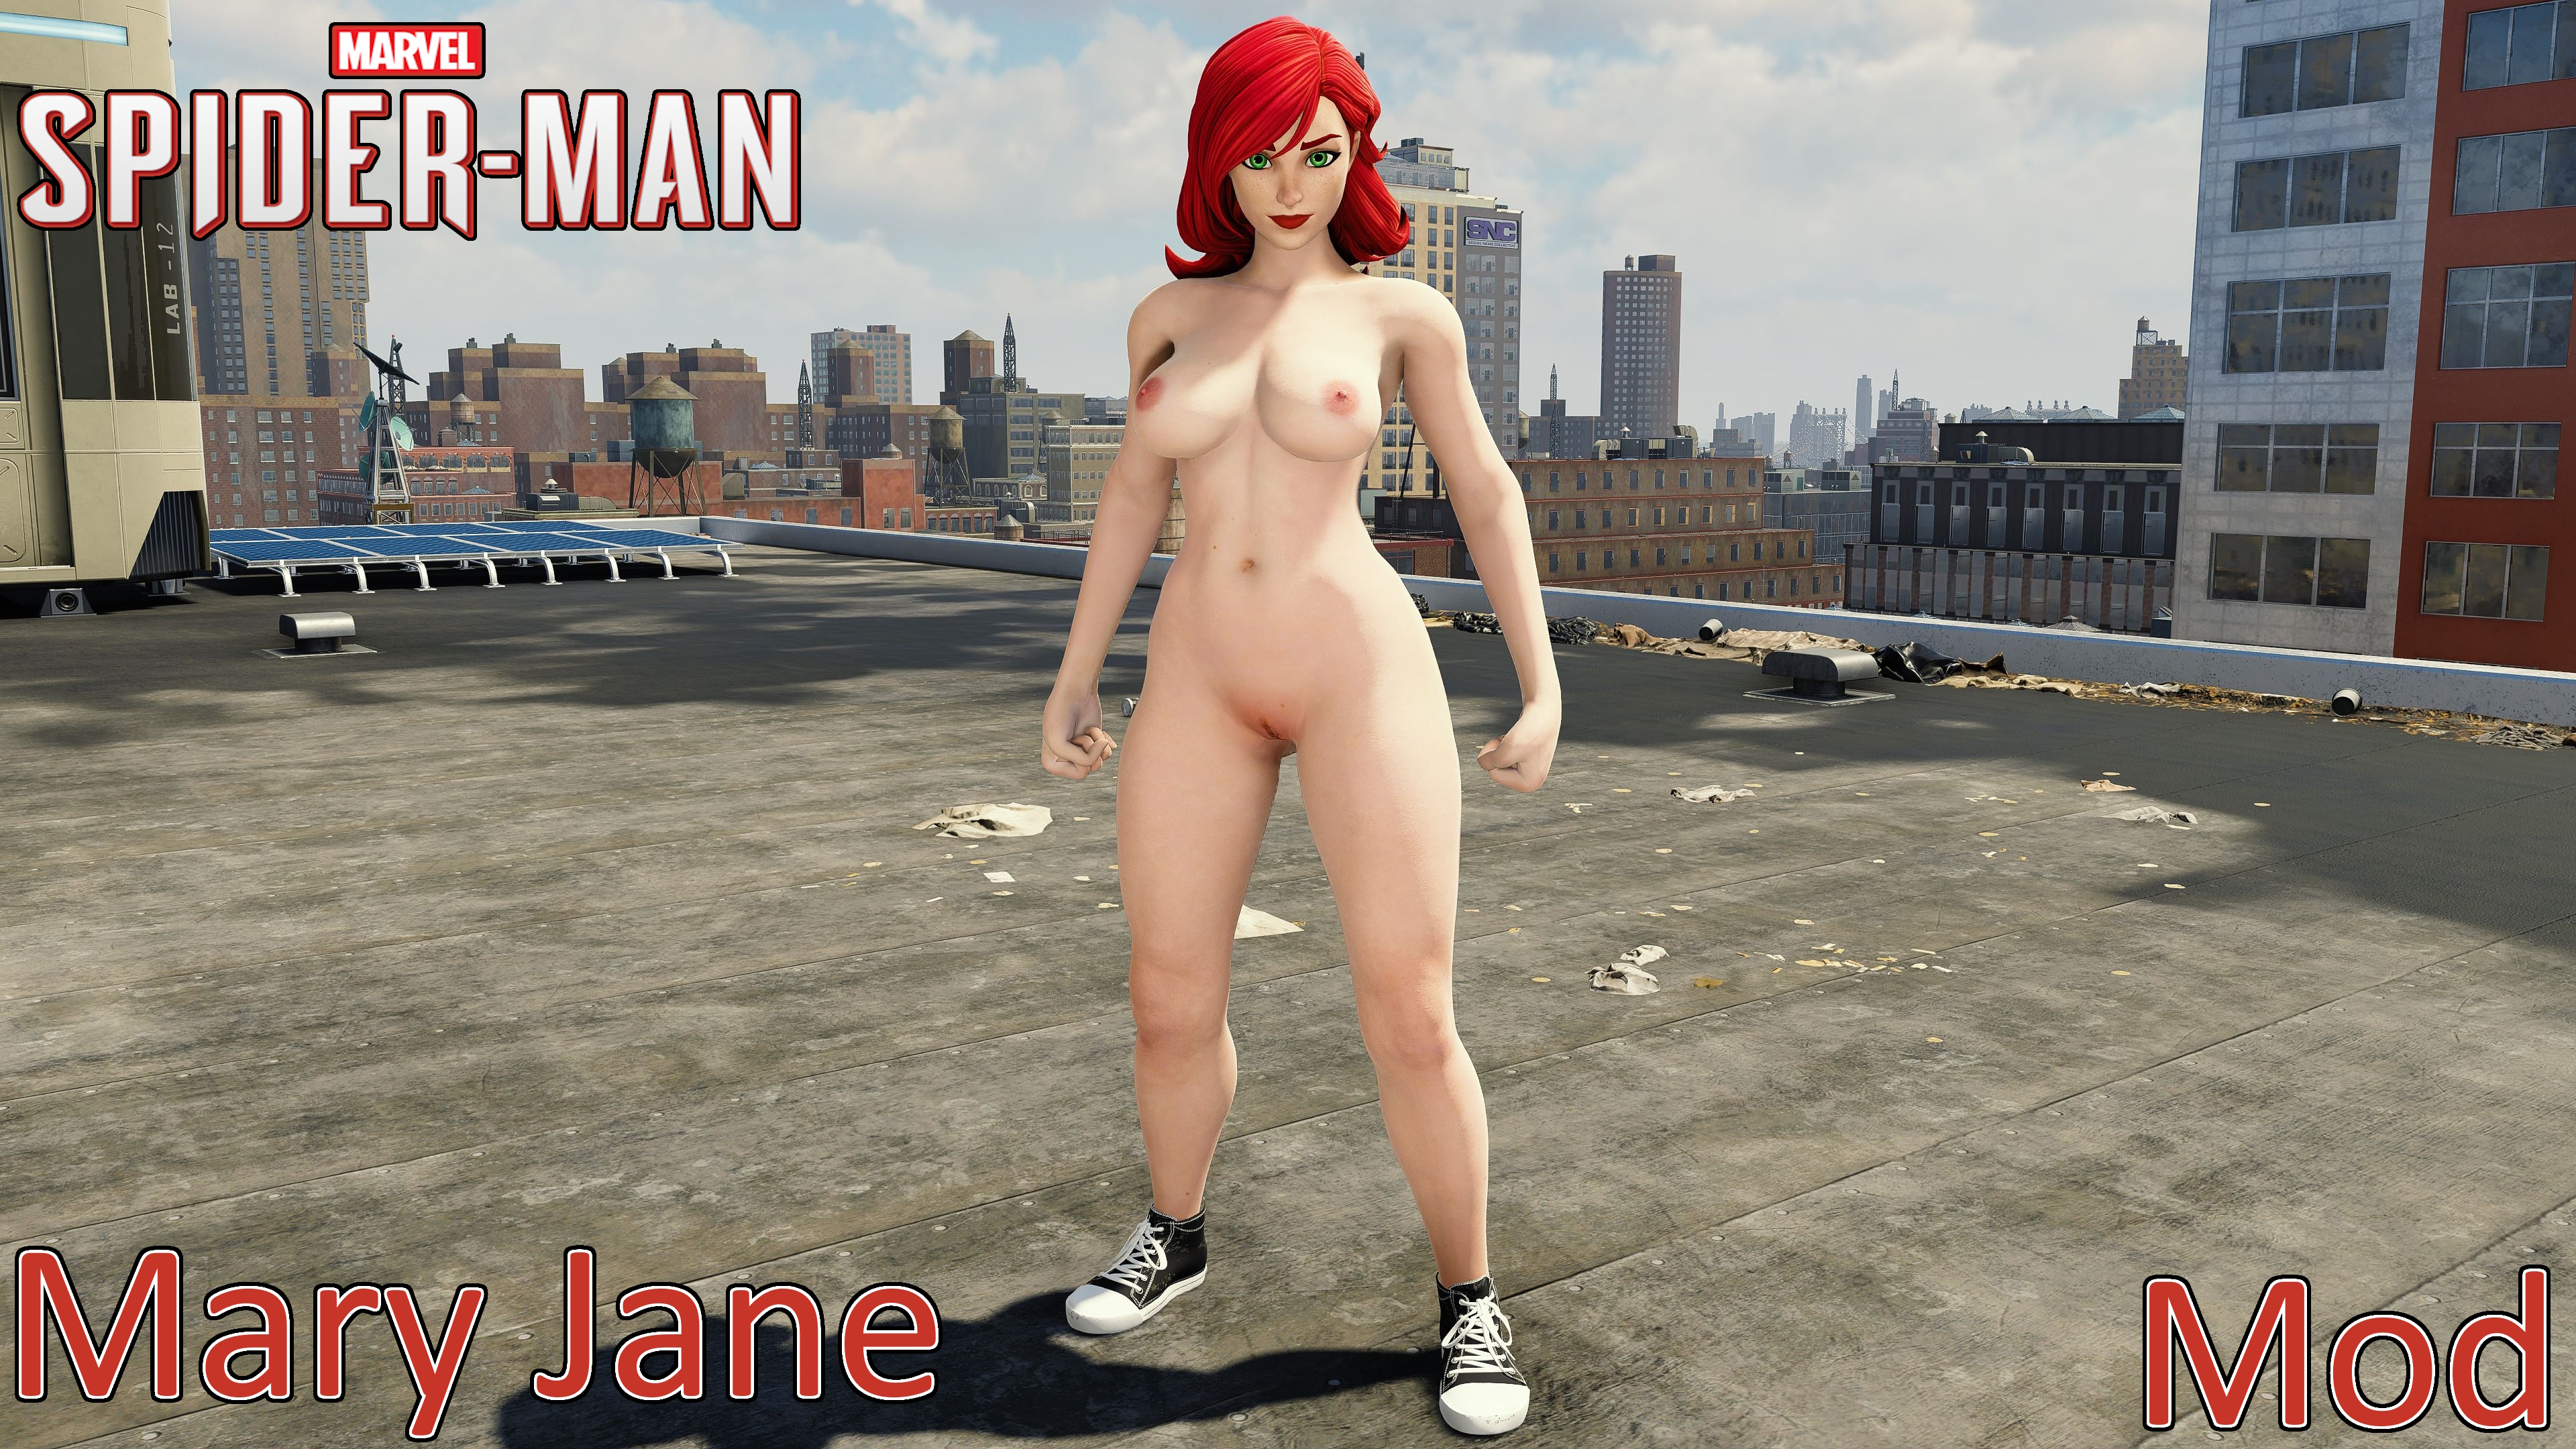 Mj from spider-man naked